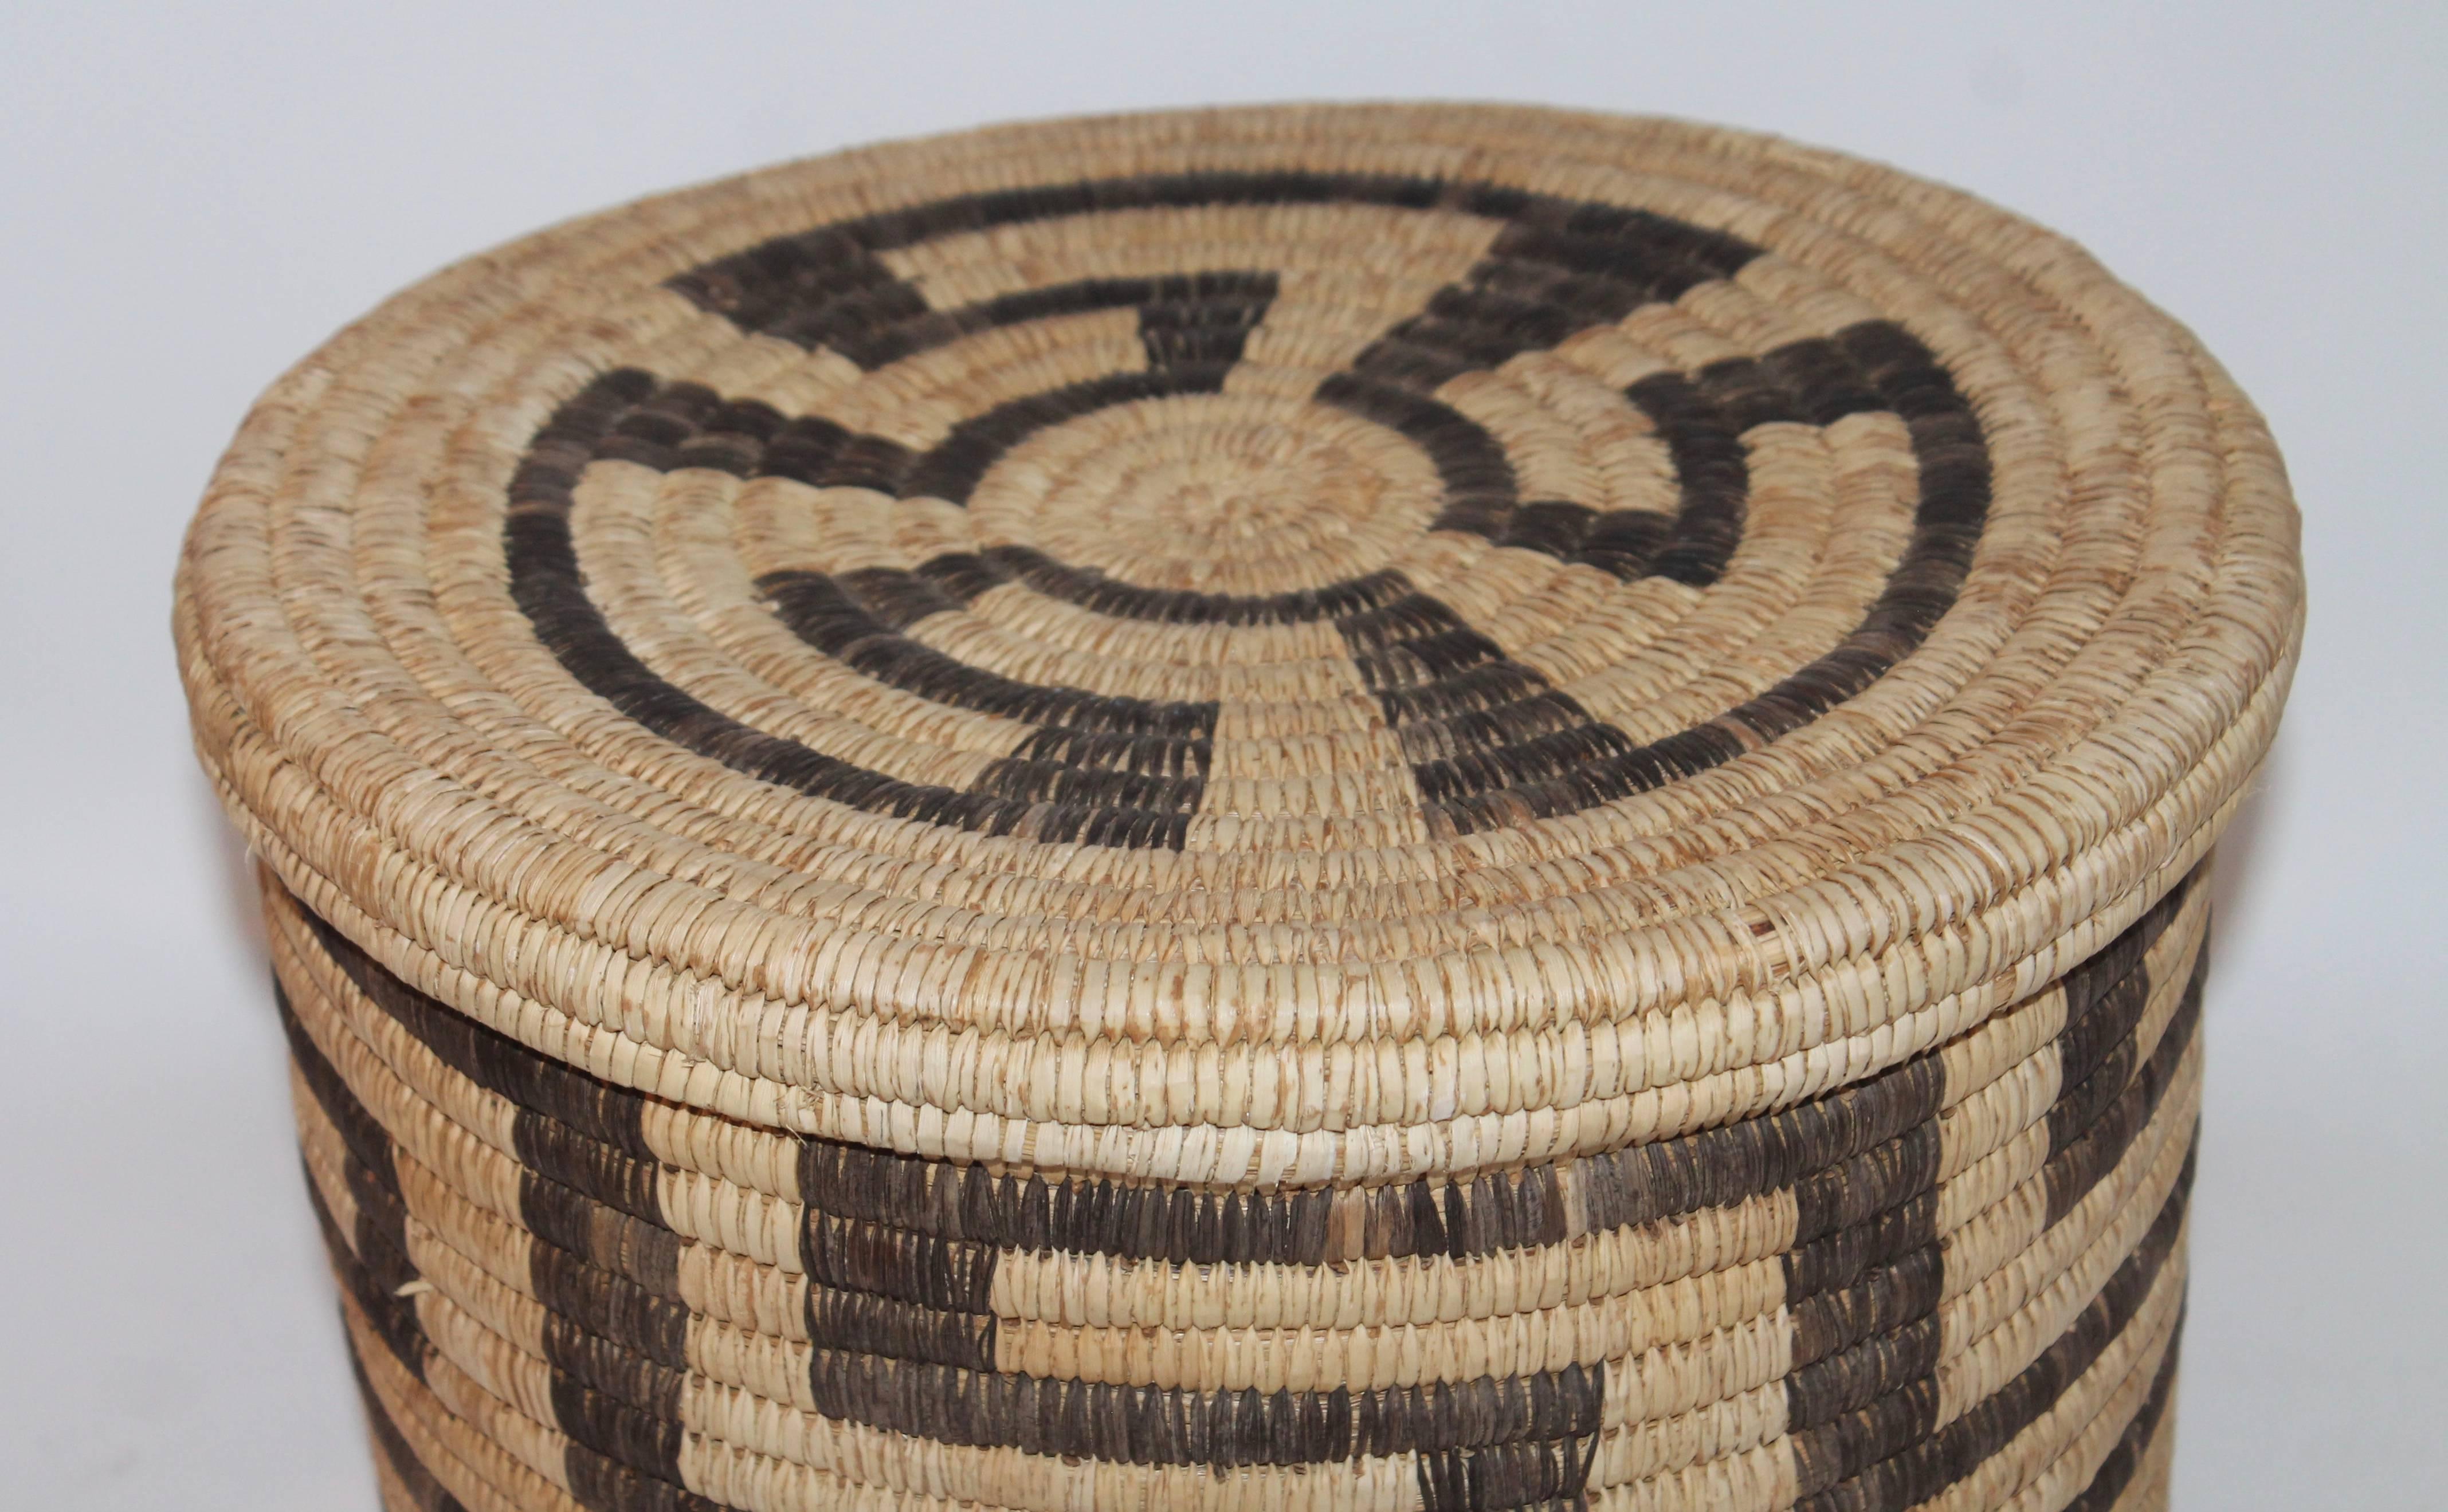 This fine handwoven Papago Indian basket if in fine condition with minor wear to rim, very little does not detract from the beauty. These larger size baskets are much more rare or even very hard to find in such good condition.